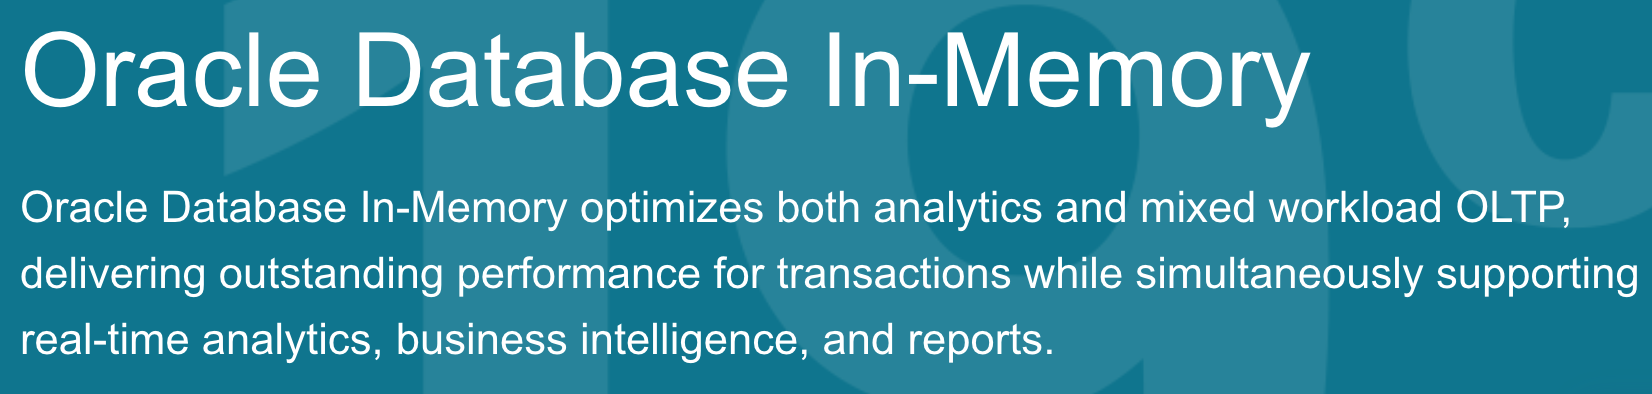 Oracle Database In-Memory optimizes both analytics and mixed workload OLTP, delivering outstanding performance for transactions while simultaneously supporting real-time analytics, business intelligence, and reports.